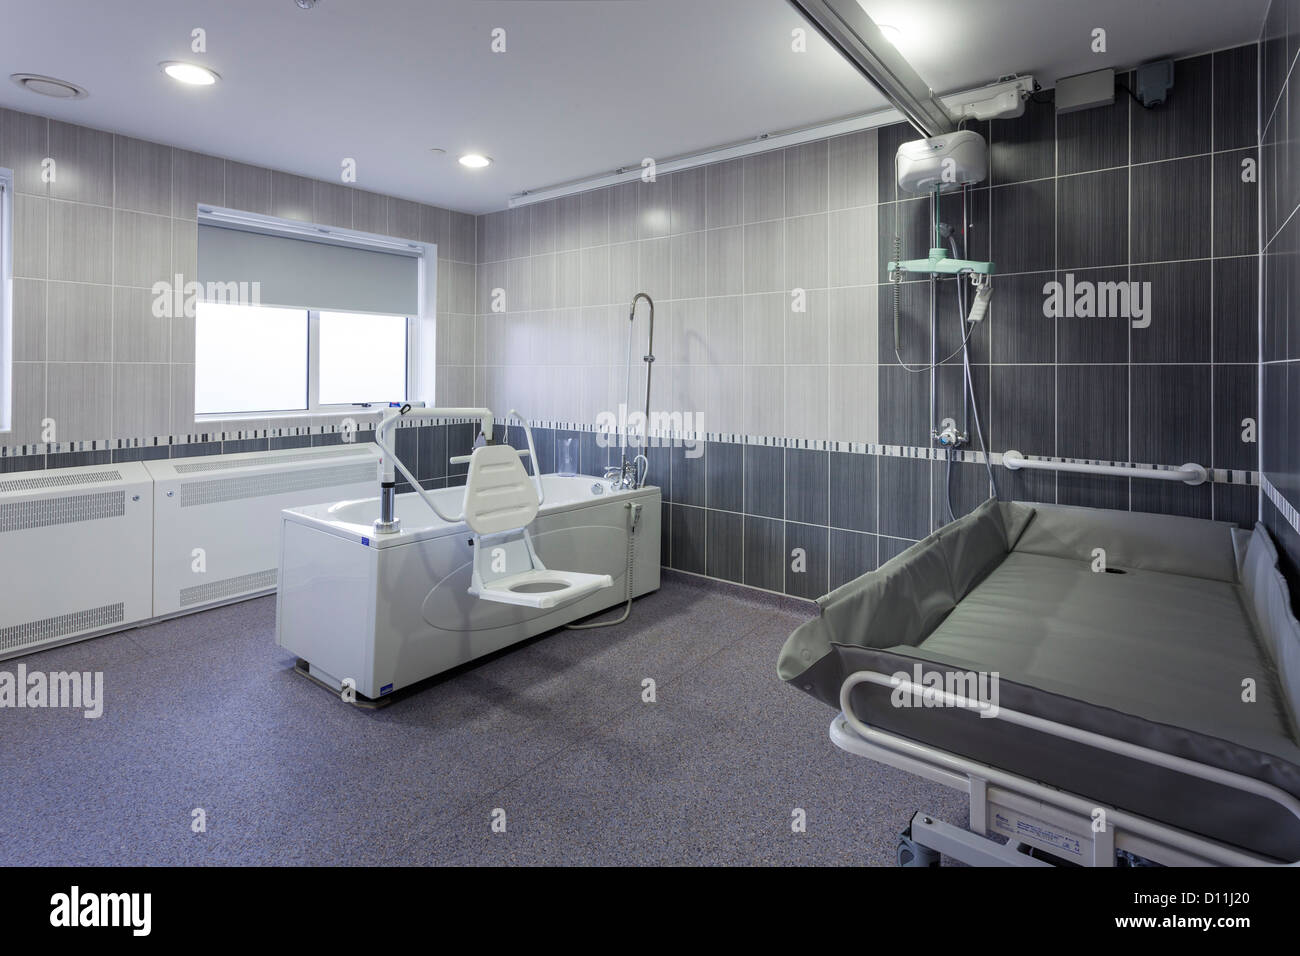 Care home assisted bathroom with ceiling track hoist lifting gear Stock Photo